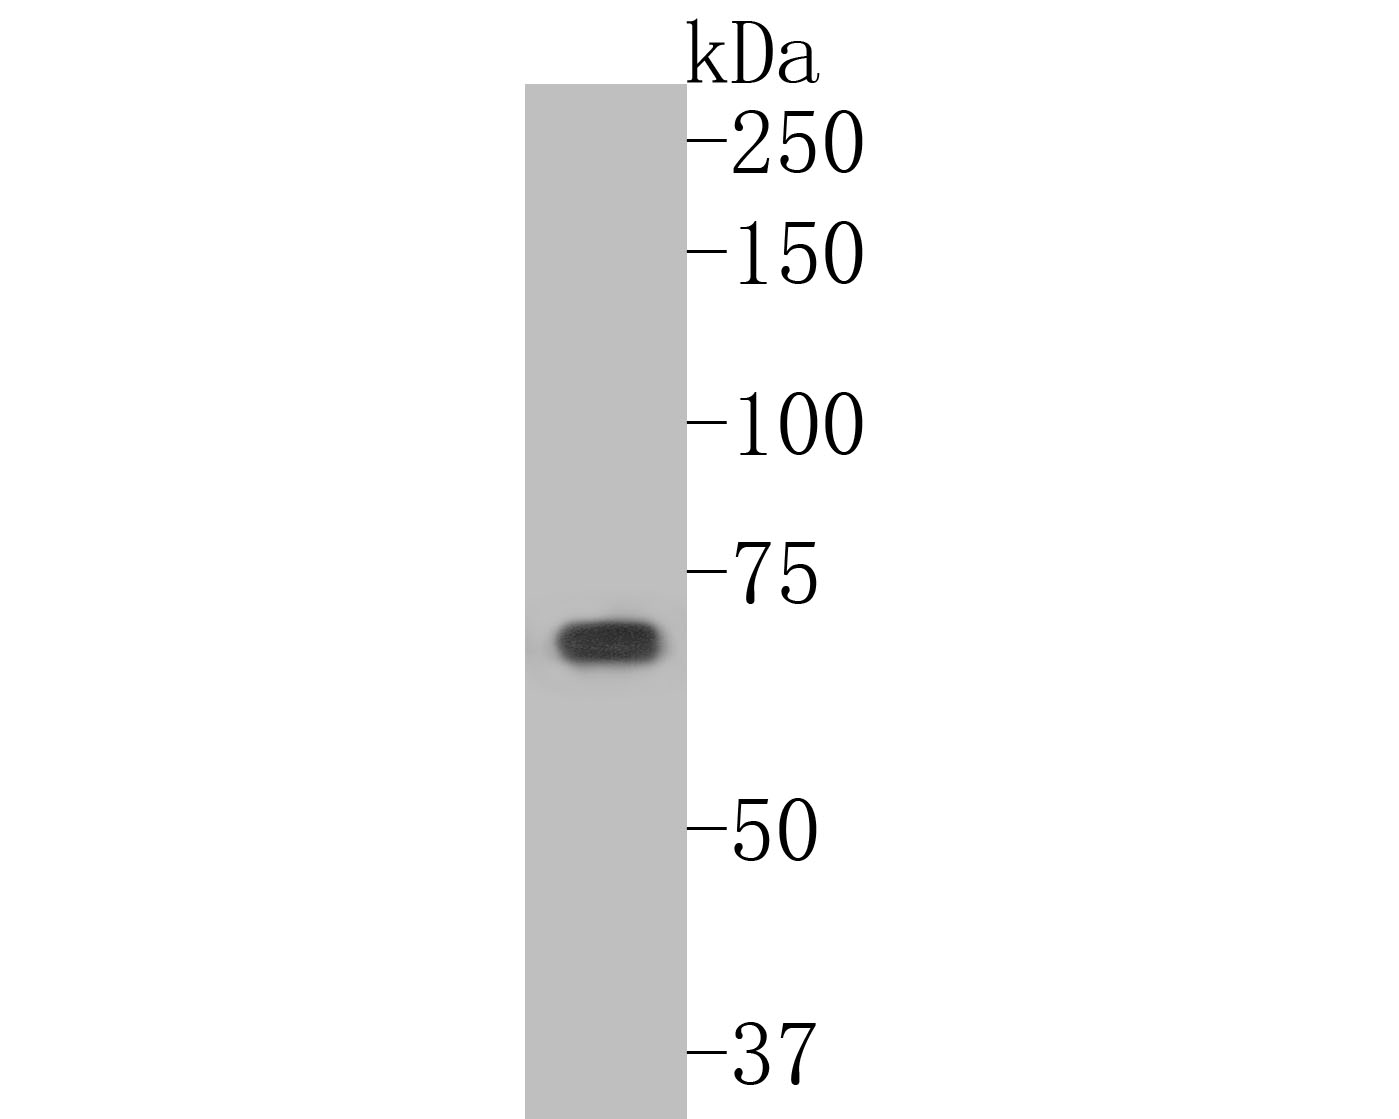 Western blot analysis of Optineurin on A431 cell lysates. Proteins were transferred to a PVDF membrane and blocked with 5% BSA in PBS for 1 hour at room temperature. The primary antibody (ER2001-02, 1/500) was used in 5% BSA at room temperature for 2 hours. Goat Anti-Rabbit IgG - HRP Secondary Antibody (HA1001) at 1:5,000 dilution was used for 1 hour at room temperature.